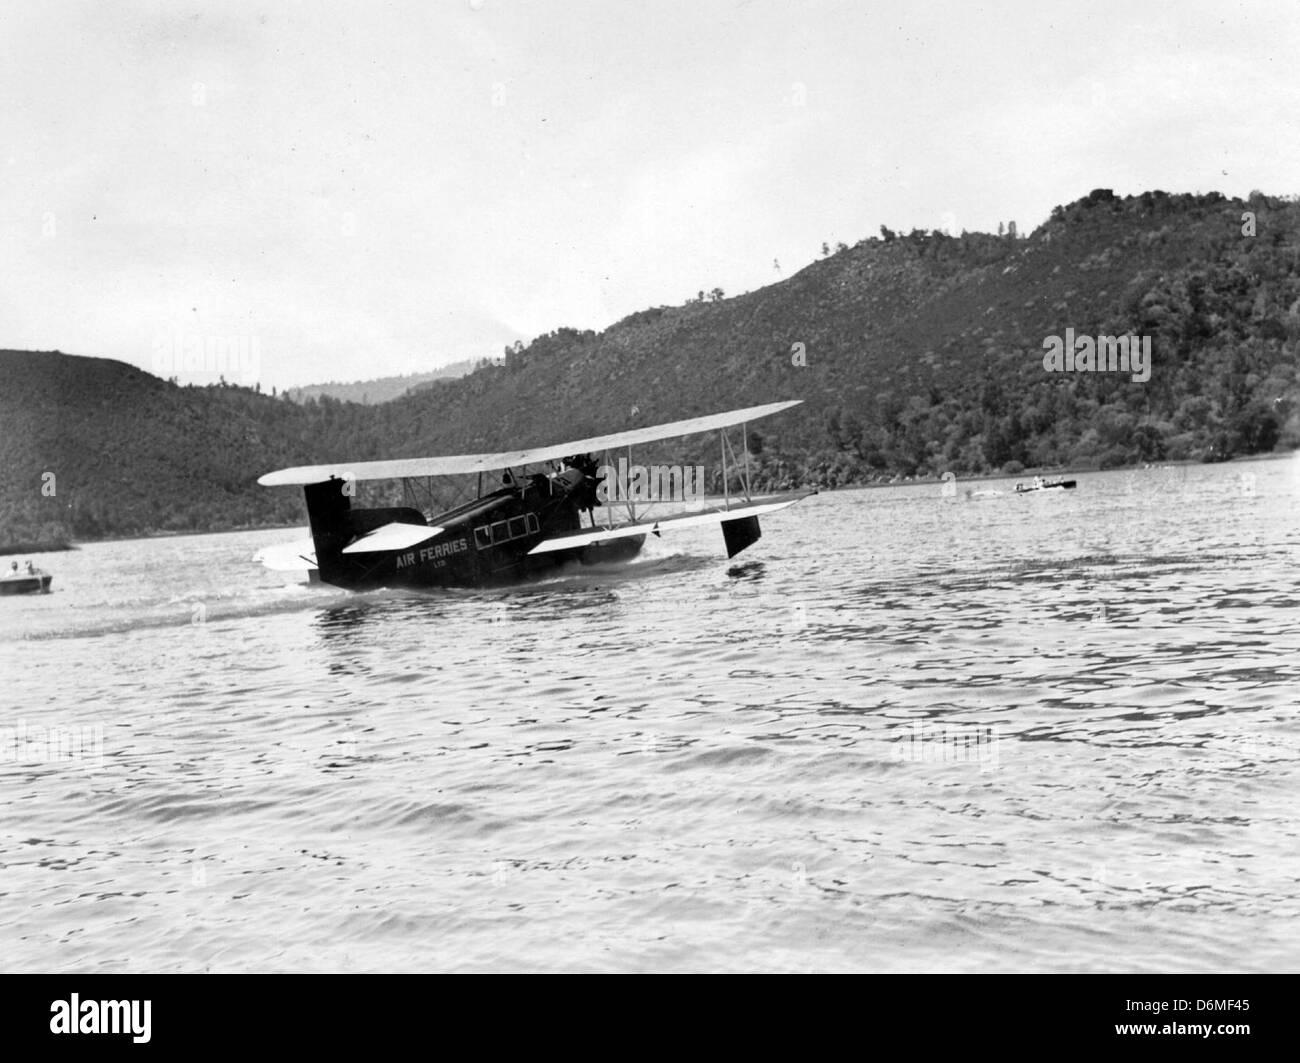 86. Loening C - 2H, Air Ferries AW am Clear Lake, c31 Stockfoto